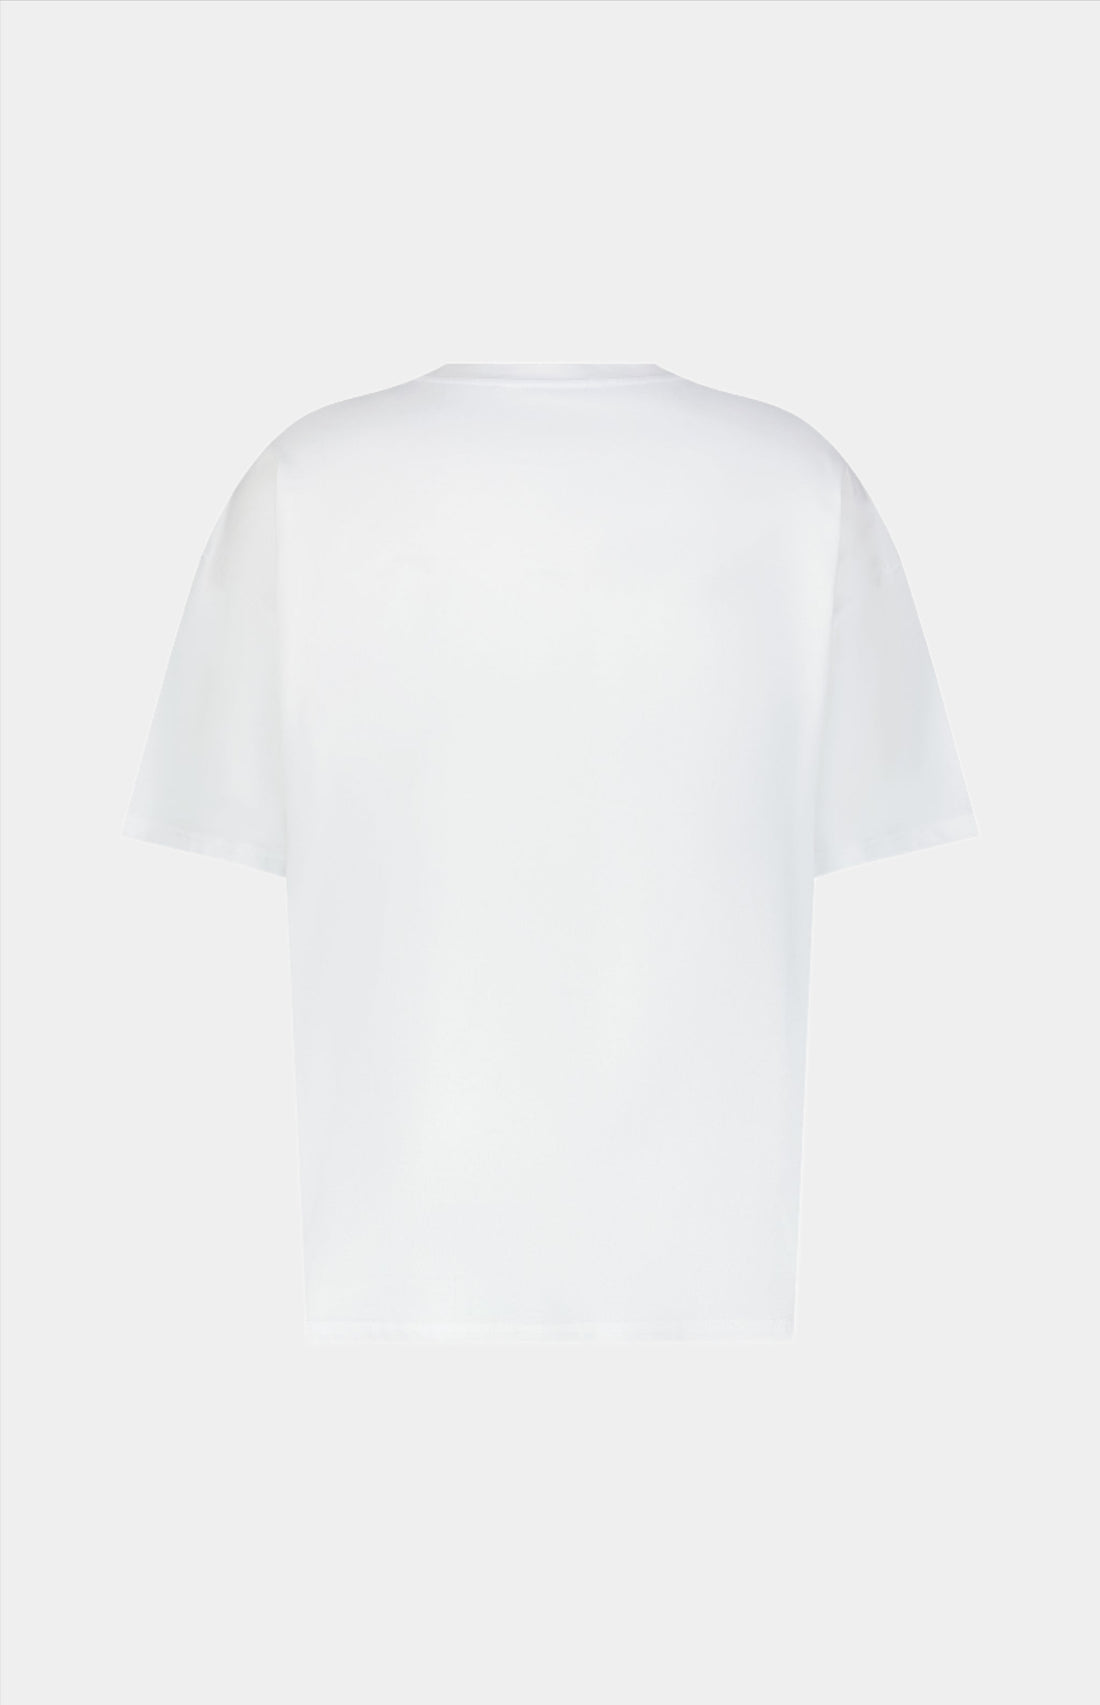 Elevate your style with our Premium T-Shirt. Heavy-weight, soft, and comfortable 100% luxury-weight 250GSM fabric expertly crafted in Portugal with attention to detail. Machine wash cold, hang to dry for best results. Choose your normal size for an oversized fit or size down for a regular fit. A unique and stylish addition to your wardrobe.